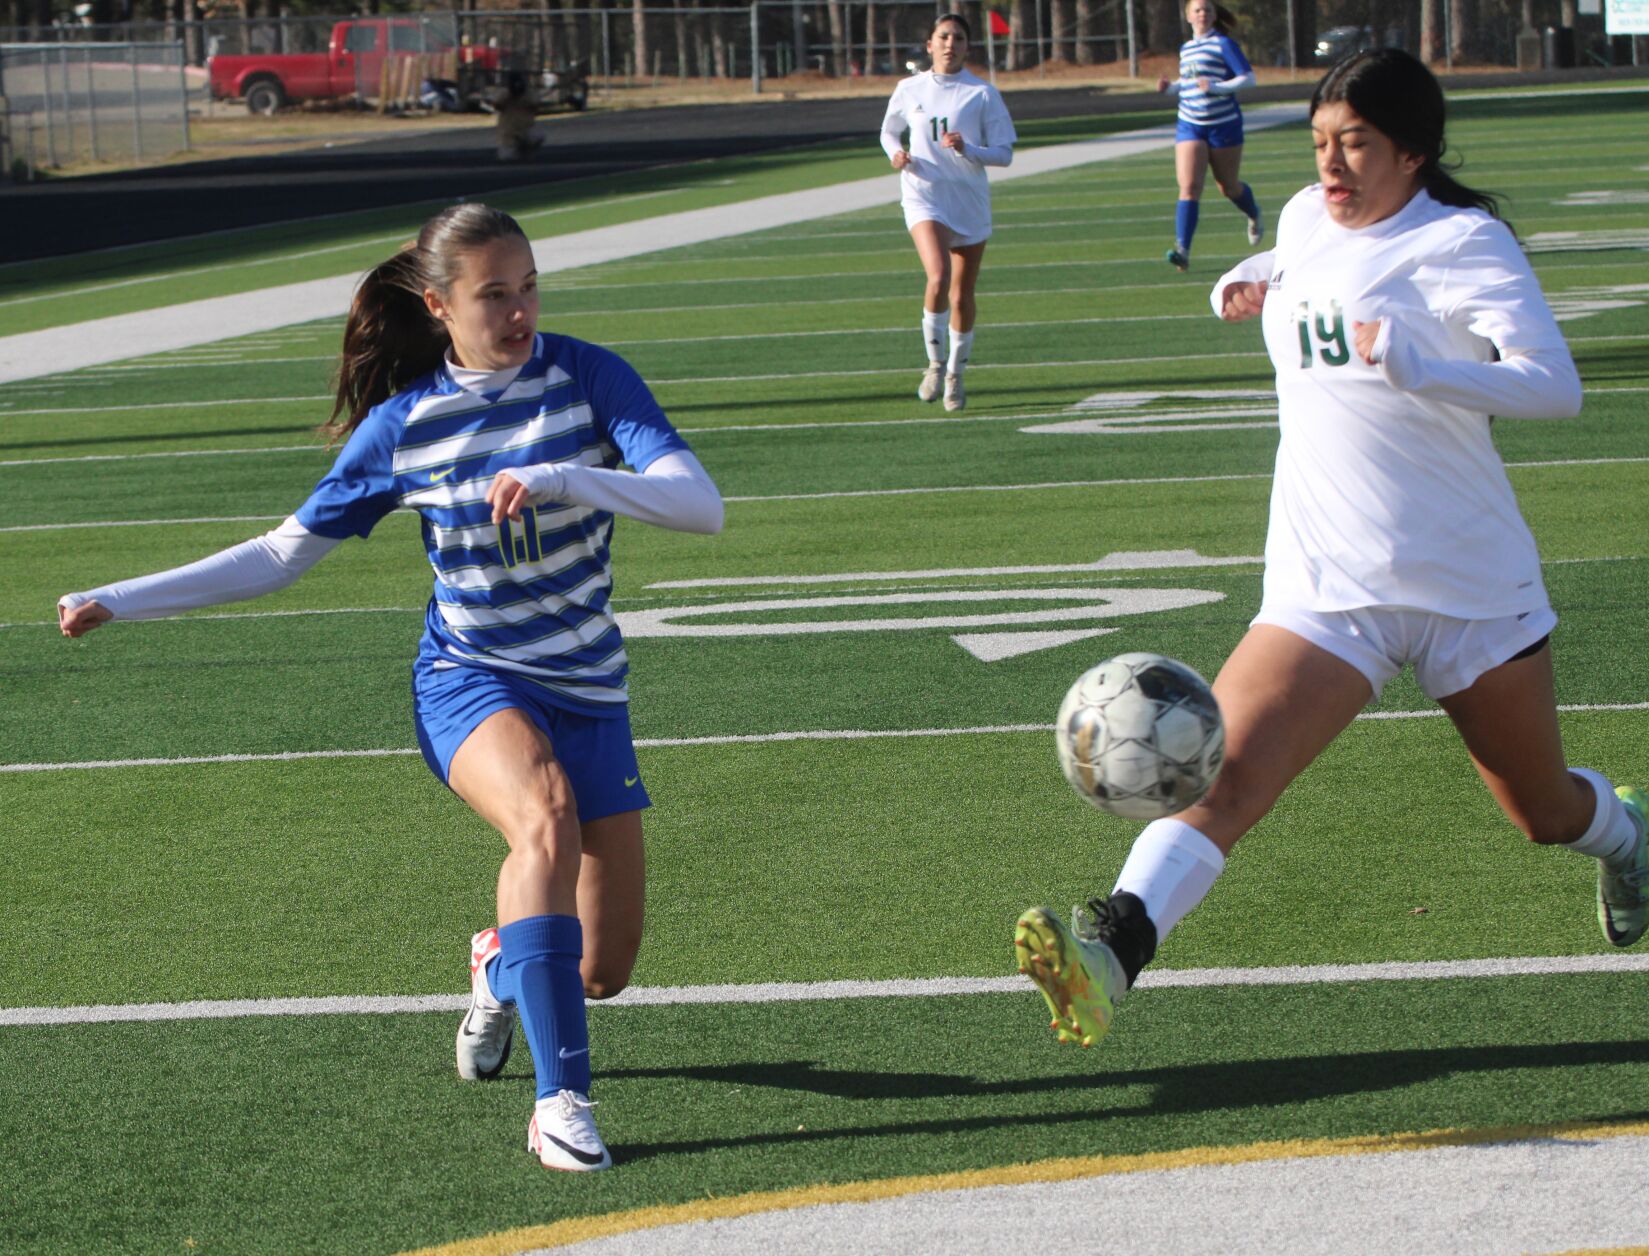 Soccer: Longview scores 4 unanswered goals to stop Fightin’ Maidens, 4-2